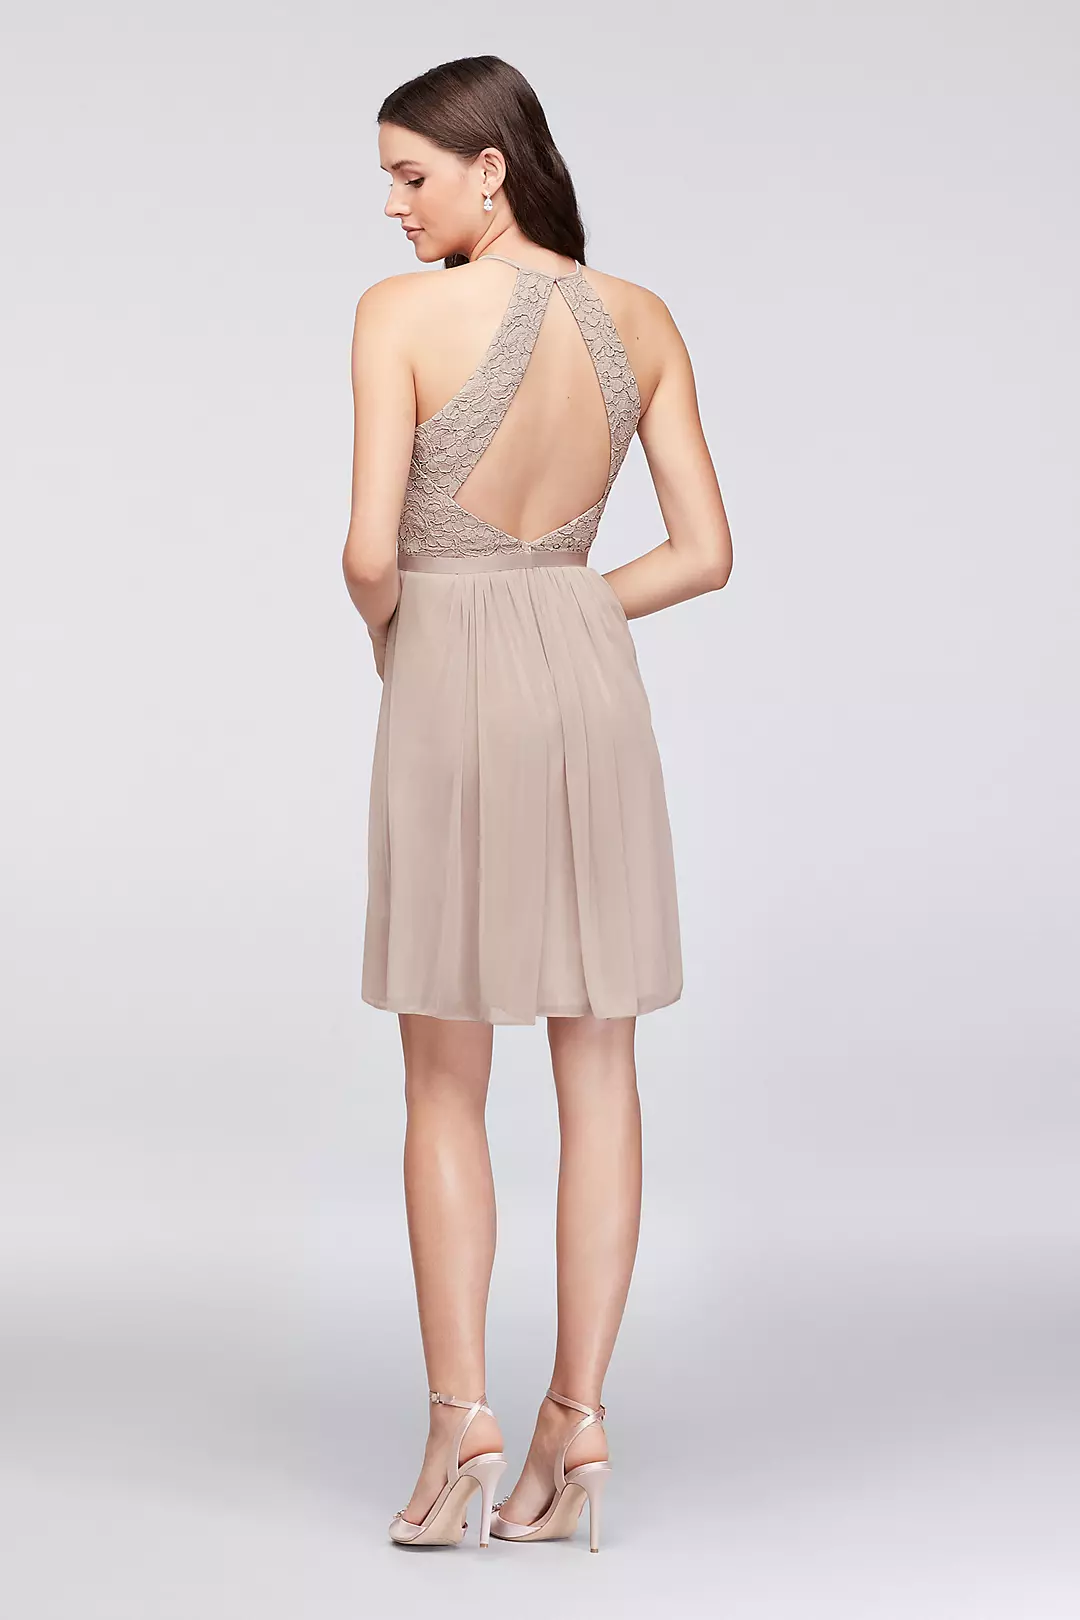 Open-Back Lace and Mesh Short Bridesmaid Dress Image 3